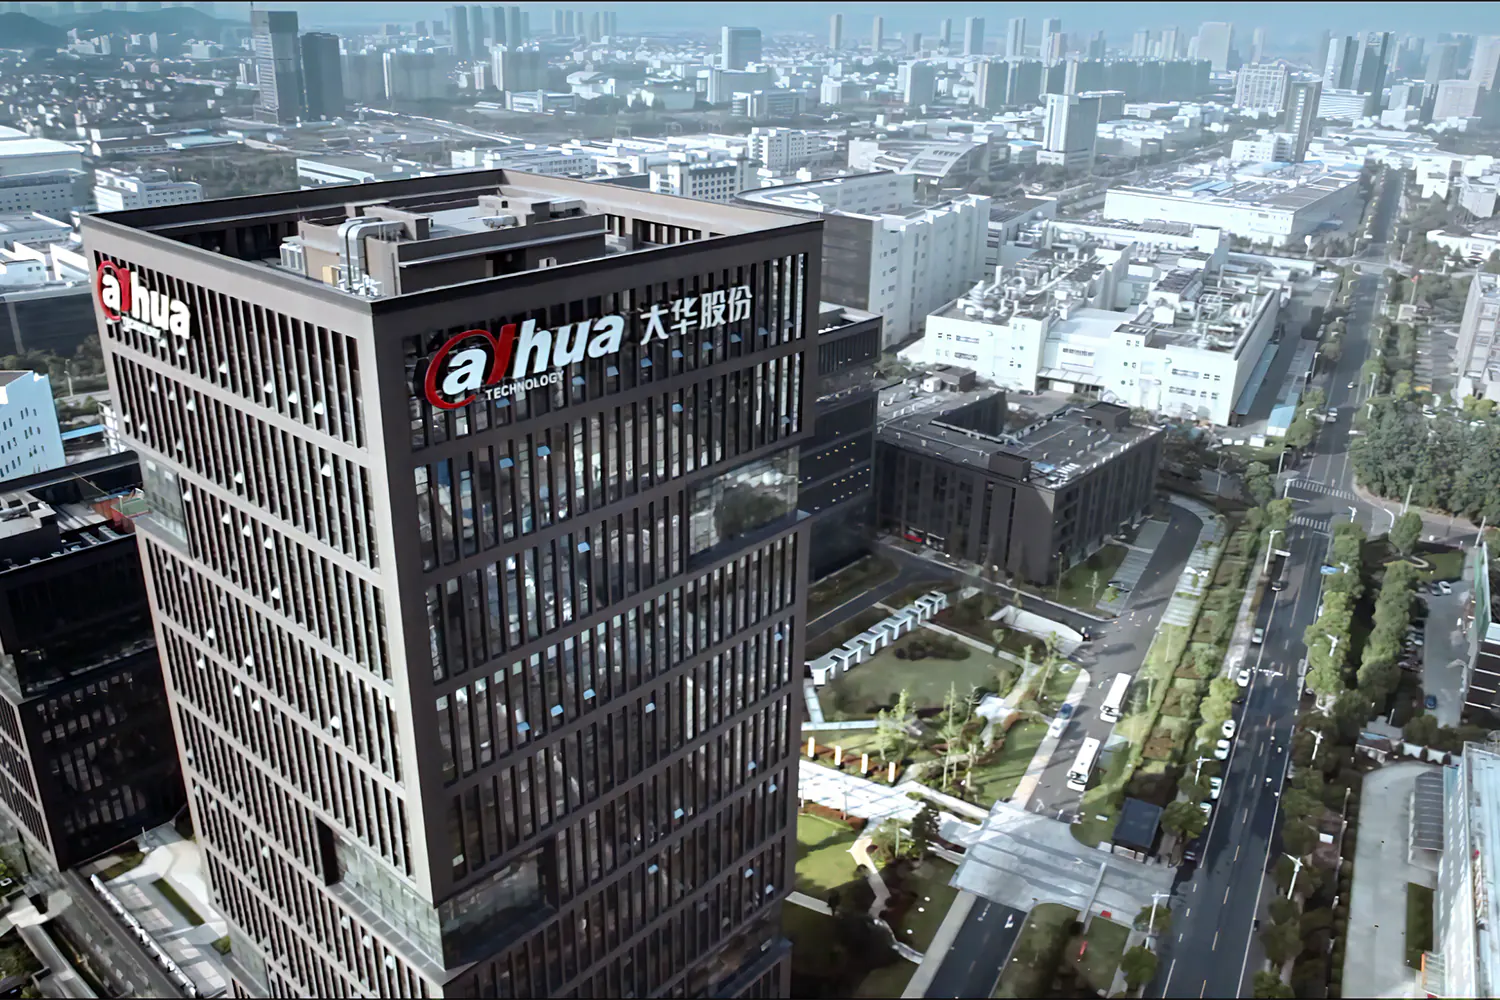 A large skyscraper office building with the Dahua Technology logo on the side. A busy city in the background.